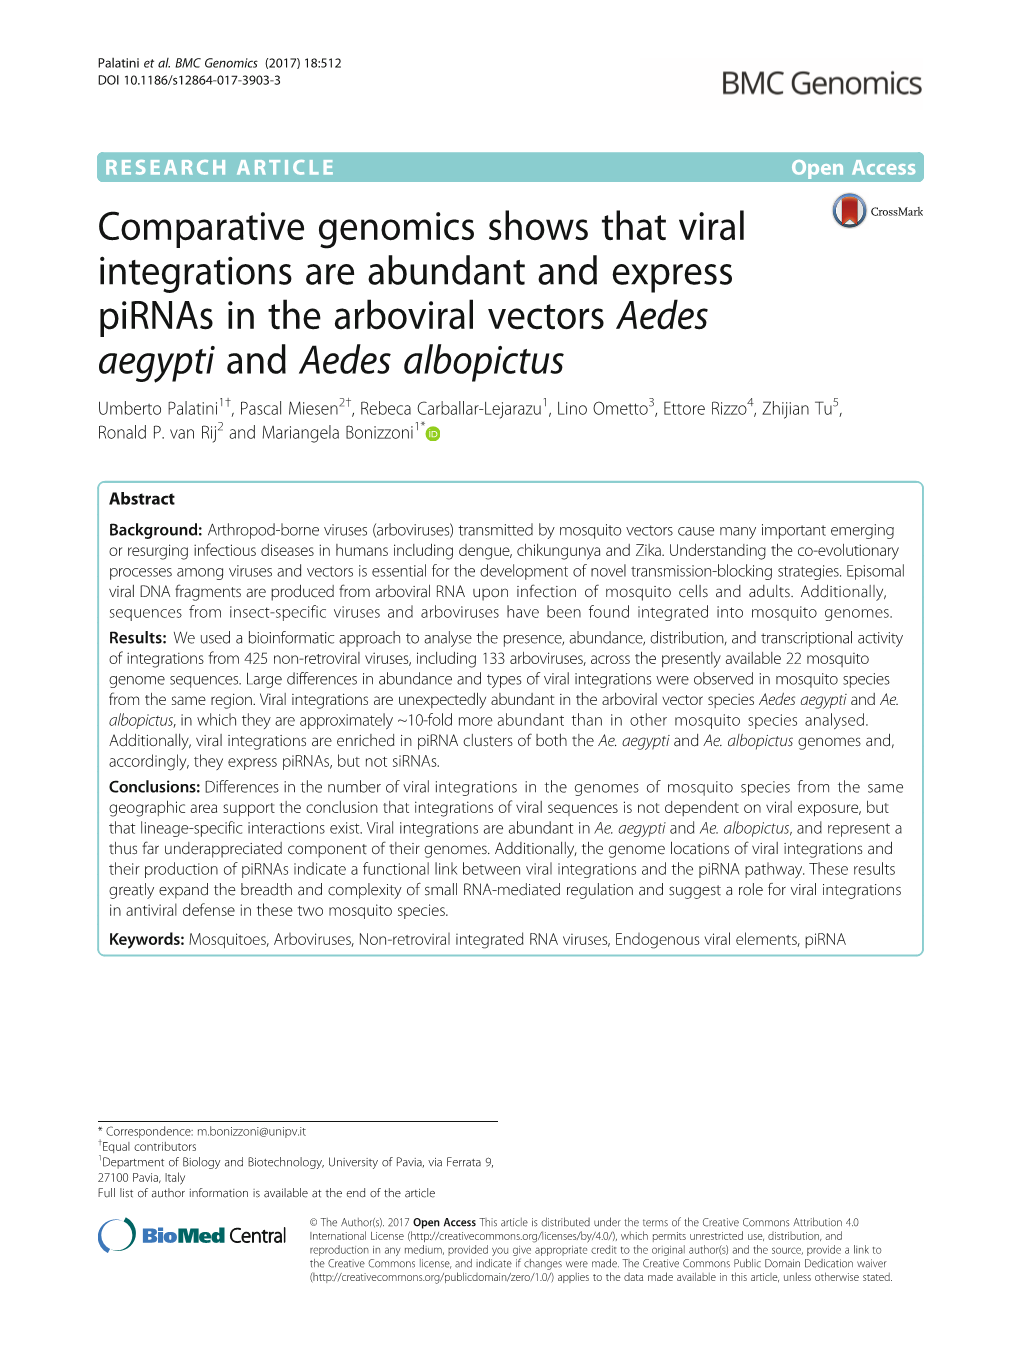 Comparative Genomics Shows That Viral Integrations Are Abundant And